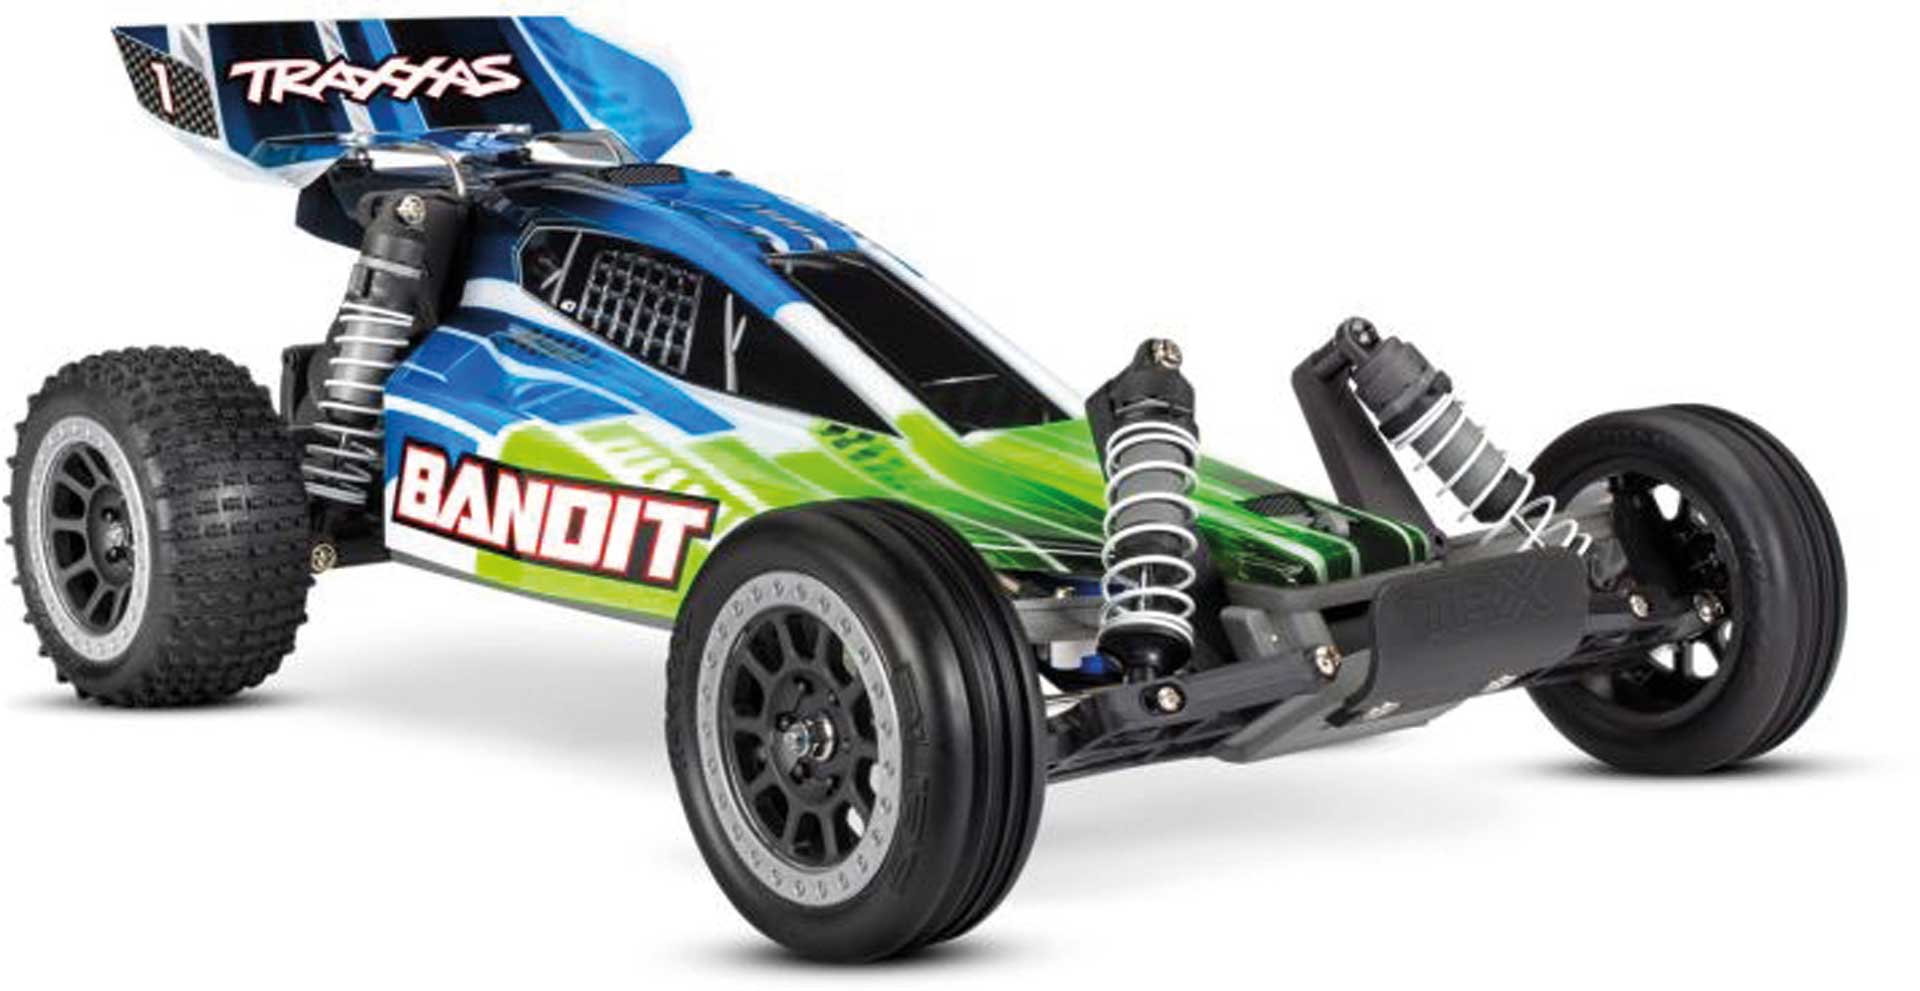 TRAXXAS BANDIT GREEN 1/10 2WD BUGGY RTR BRUSHED WITH BATTERY AND 4 AMP USB-C CHARGER